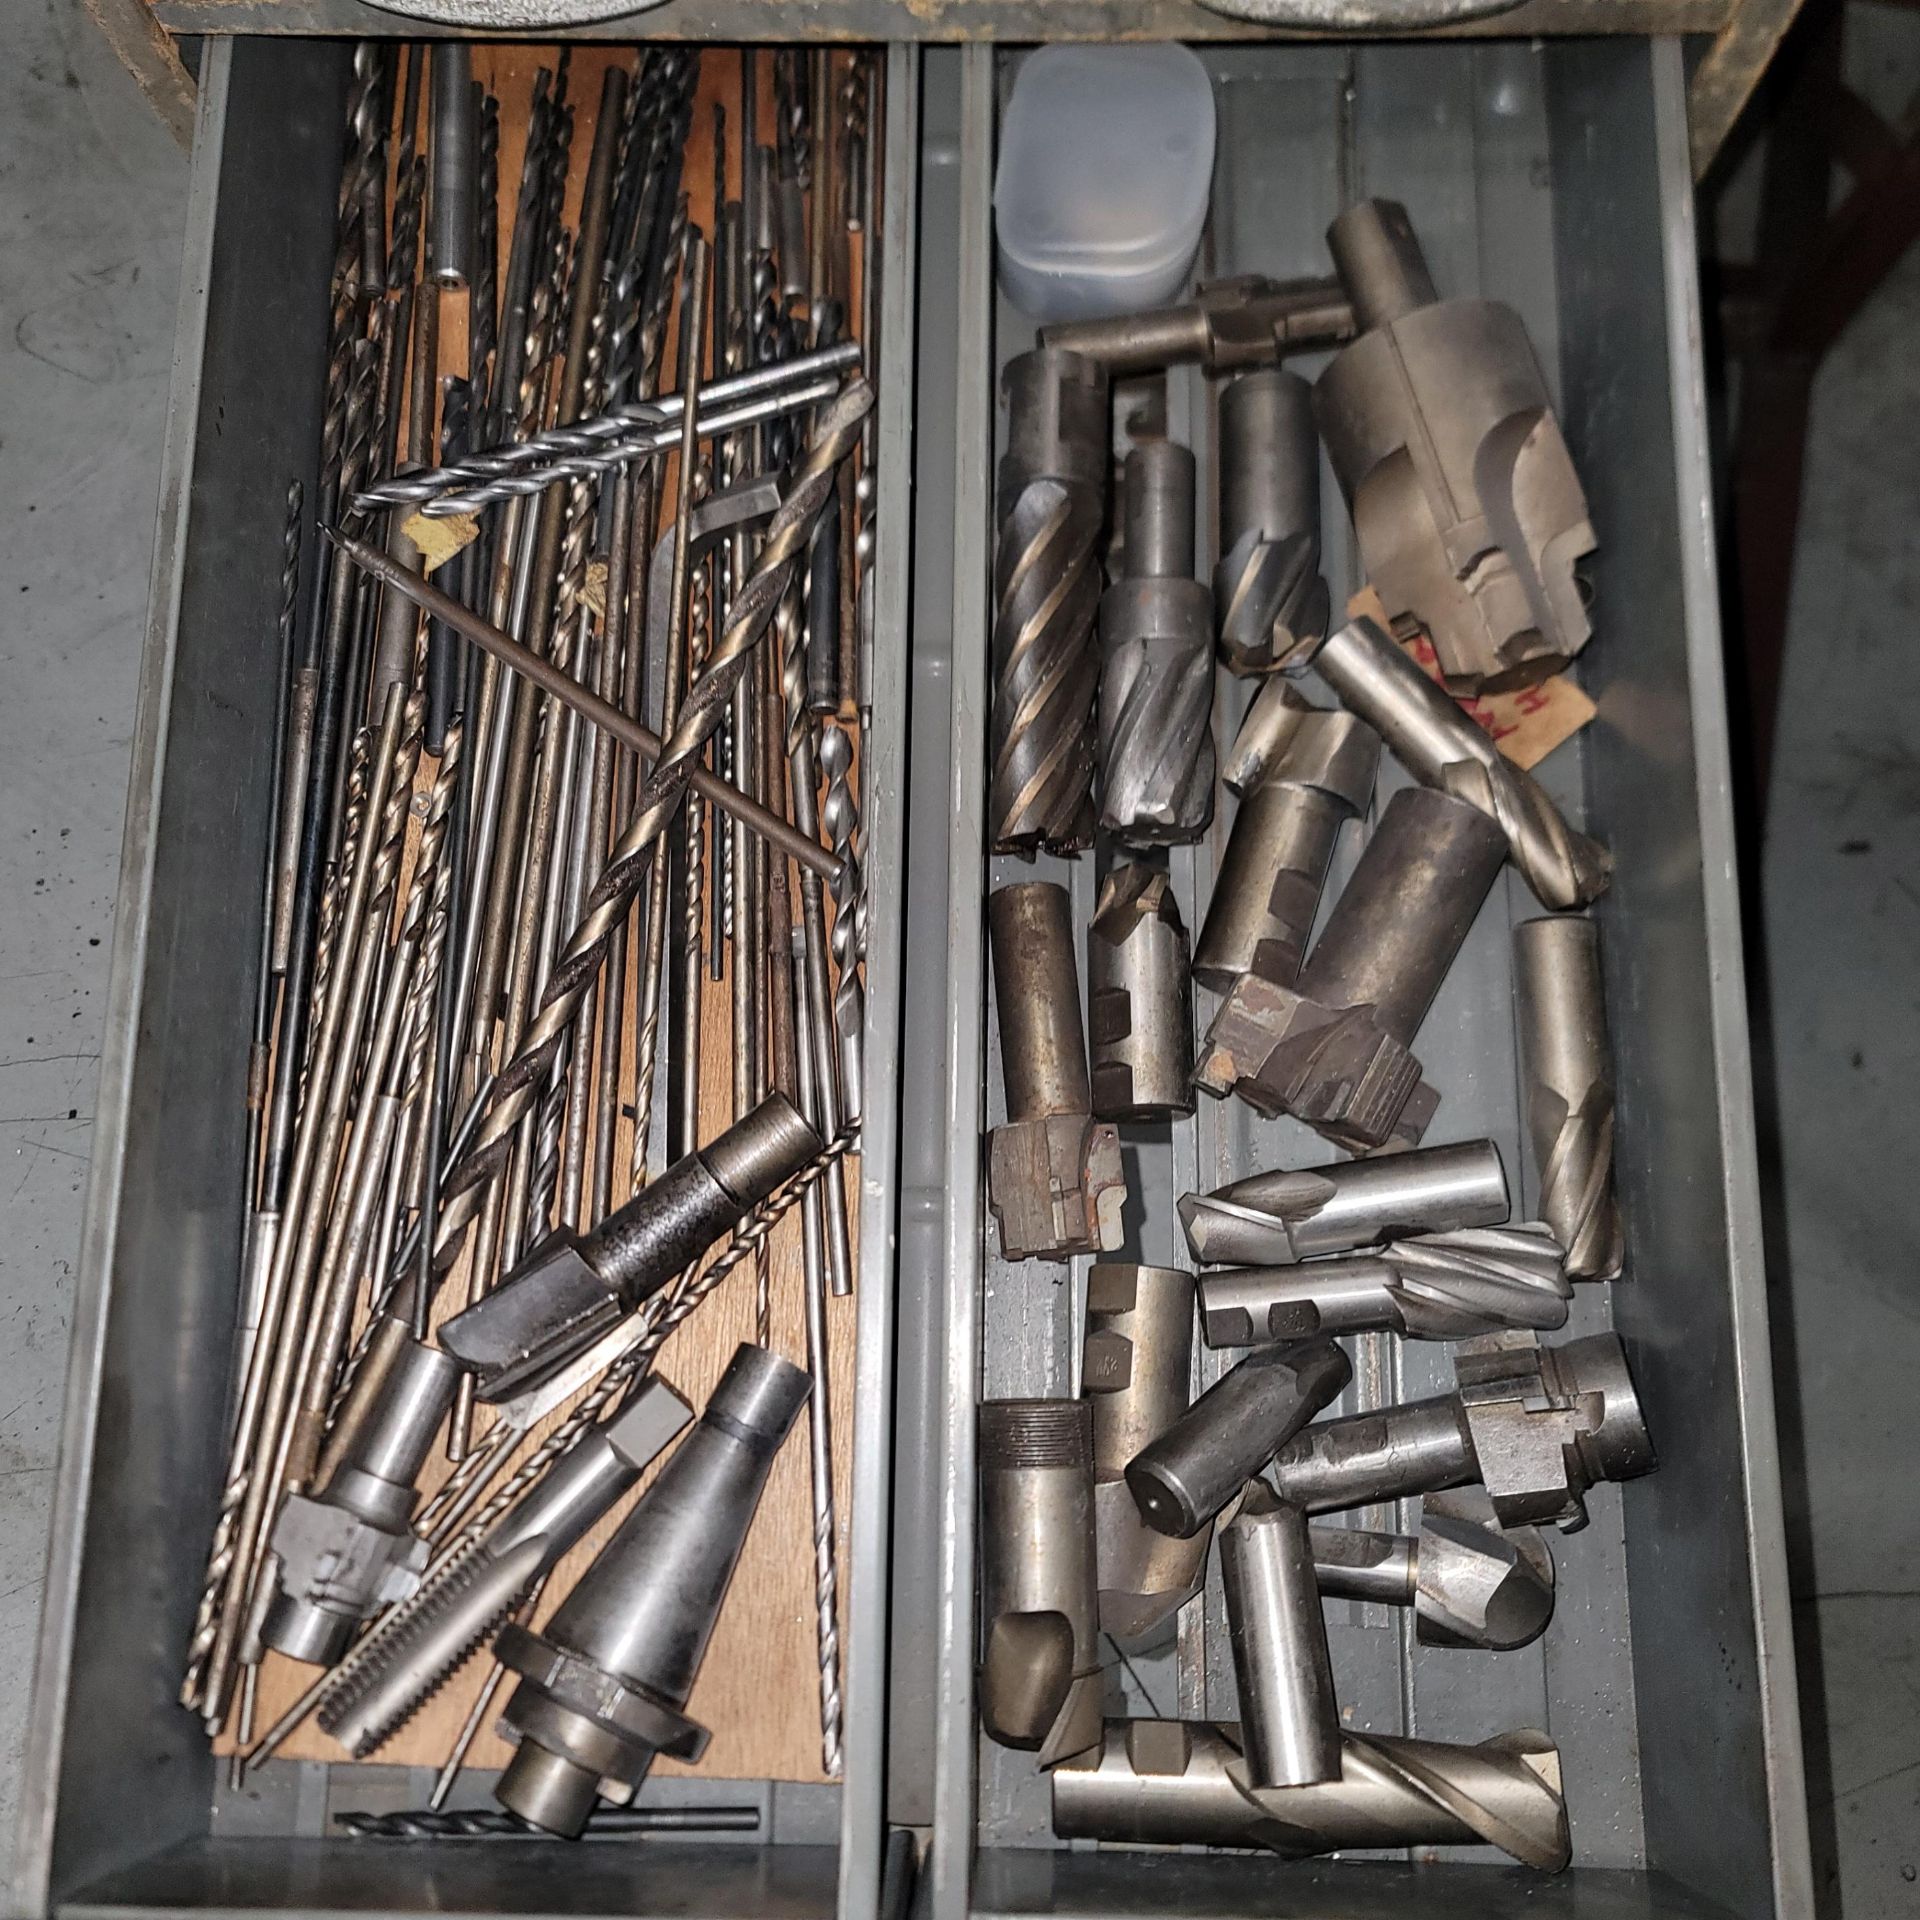 12-DRAWER STEEL CABINET, W/ CONTENTS: FULL OF TOOLING: REAMERS, TAPS, DRILLS, LATHE AND MILL - Image 4 of 7